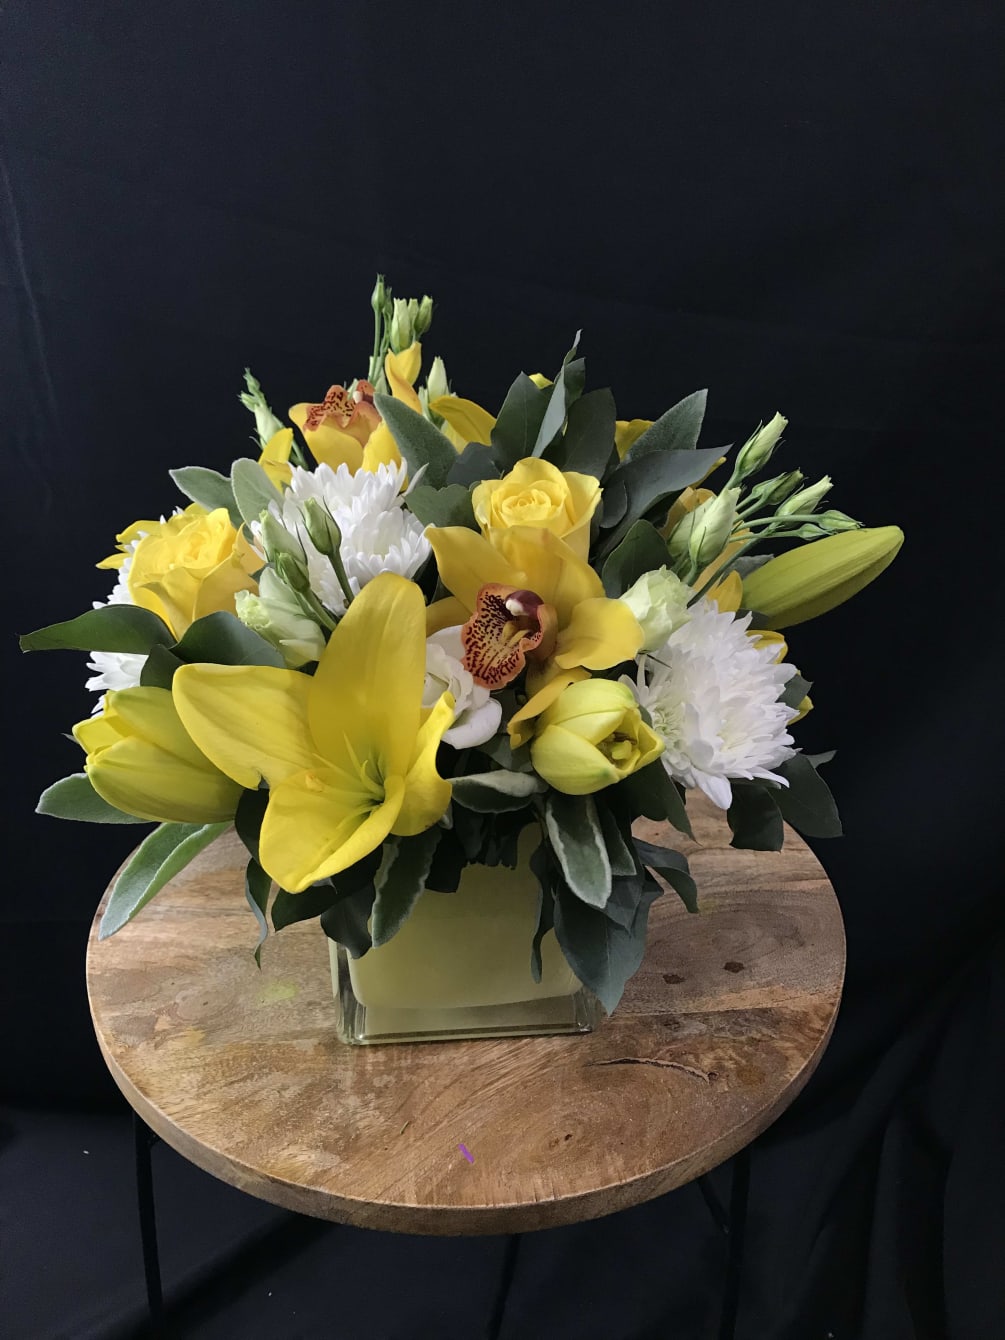 These yellow lilies are warm and inviting. Interspersed with greenery and bursts